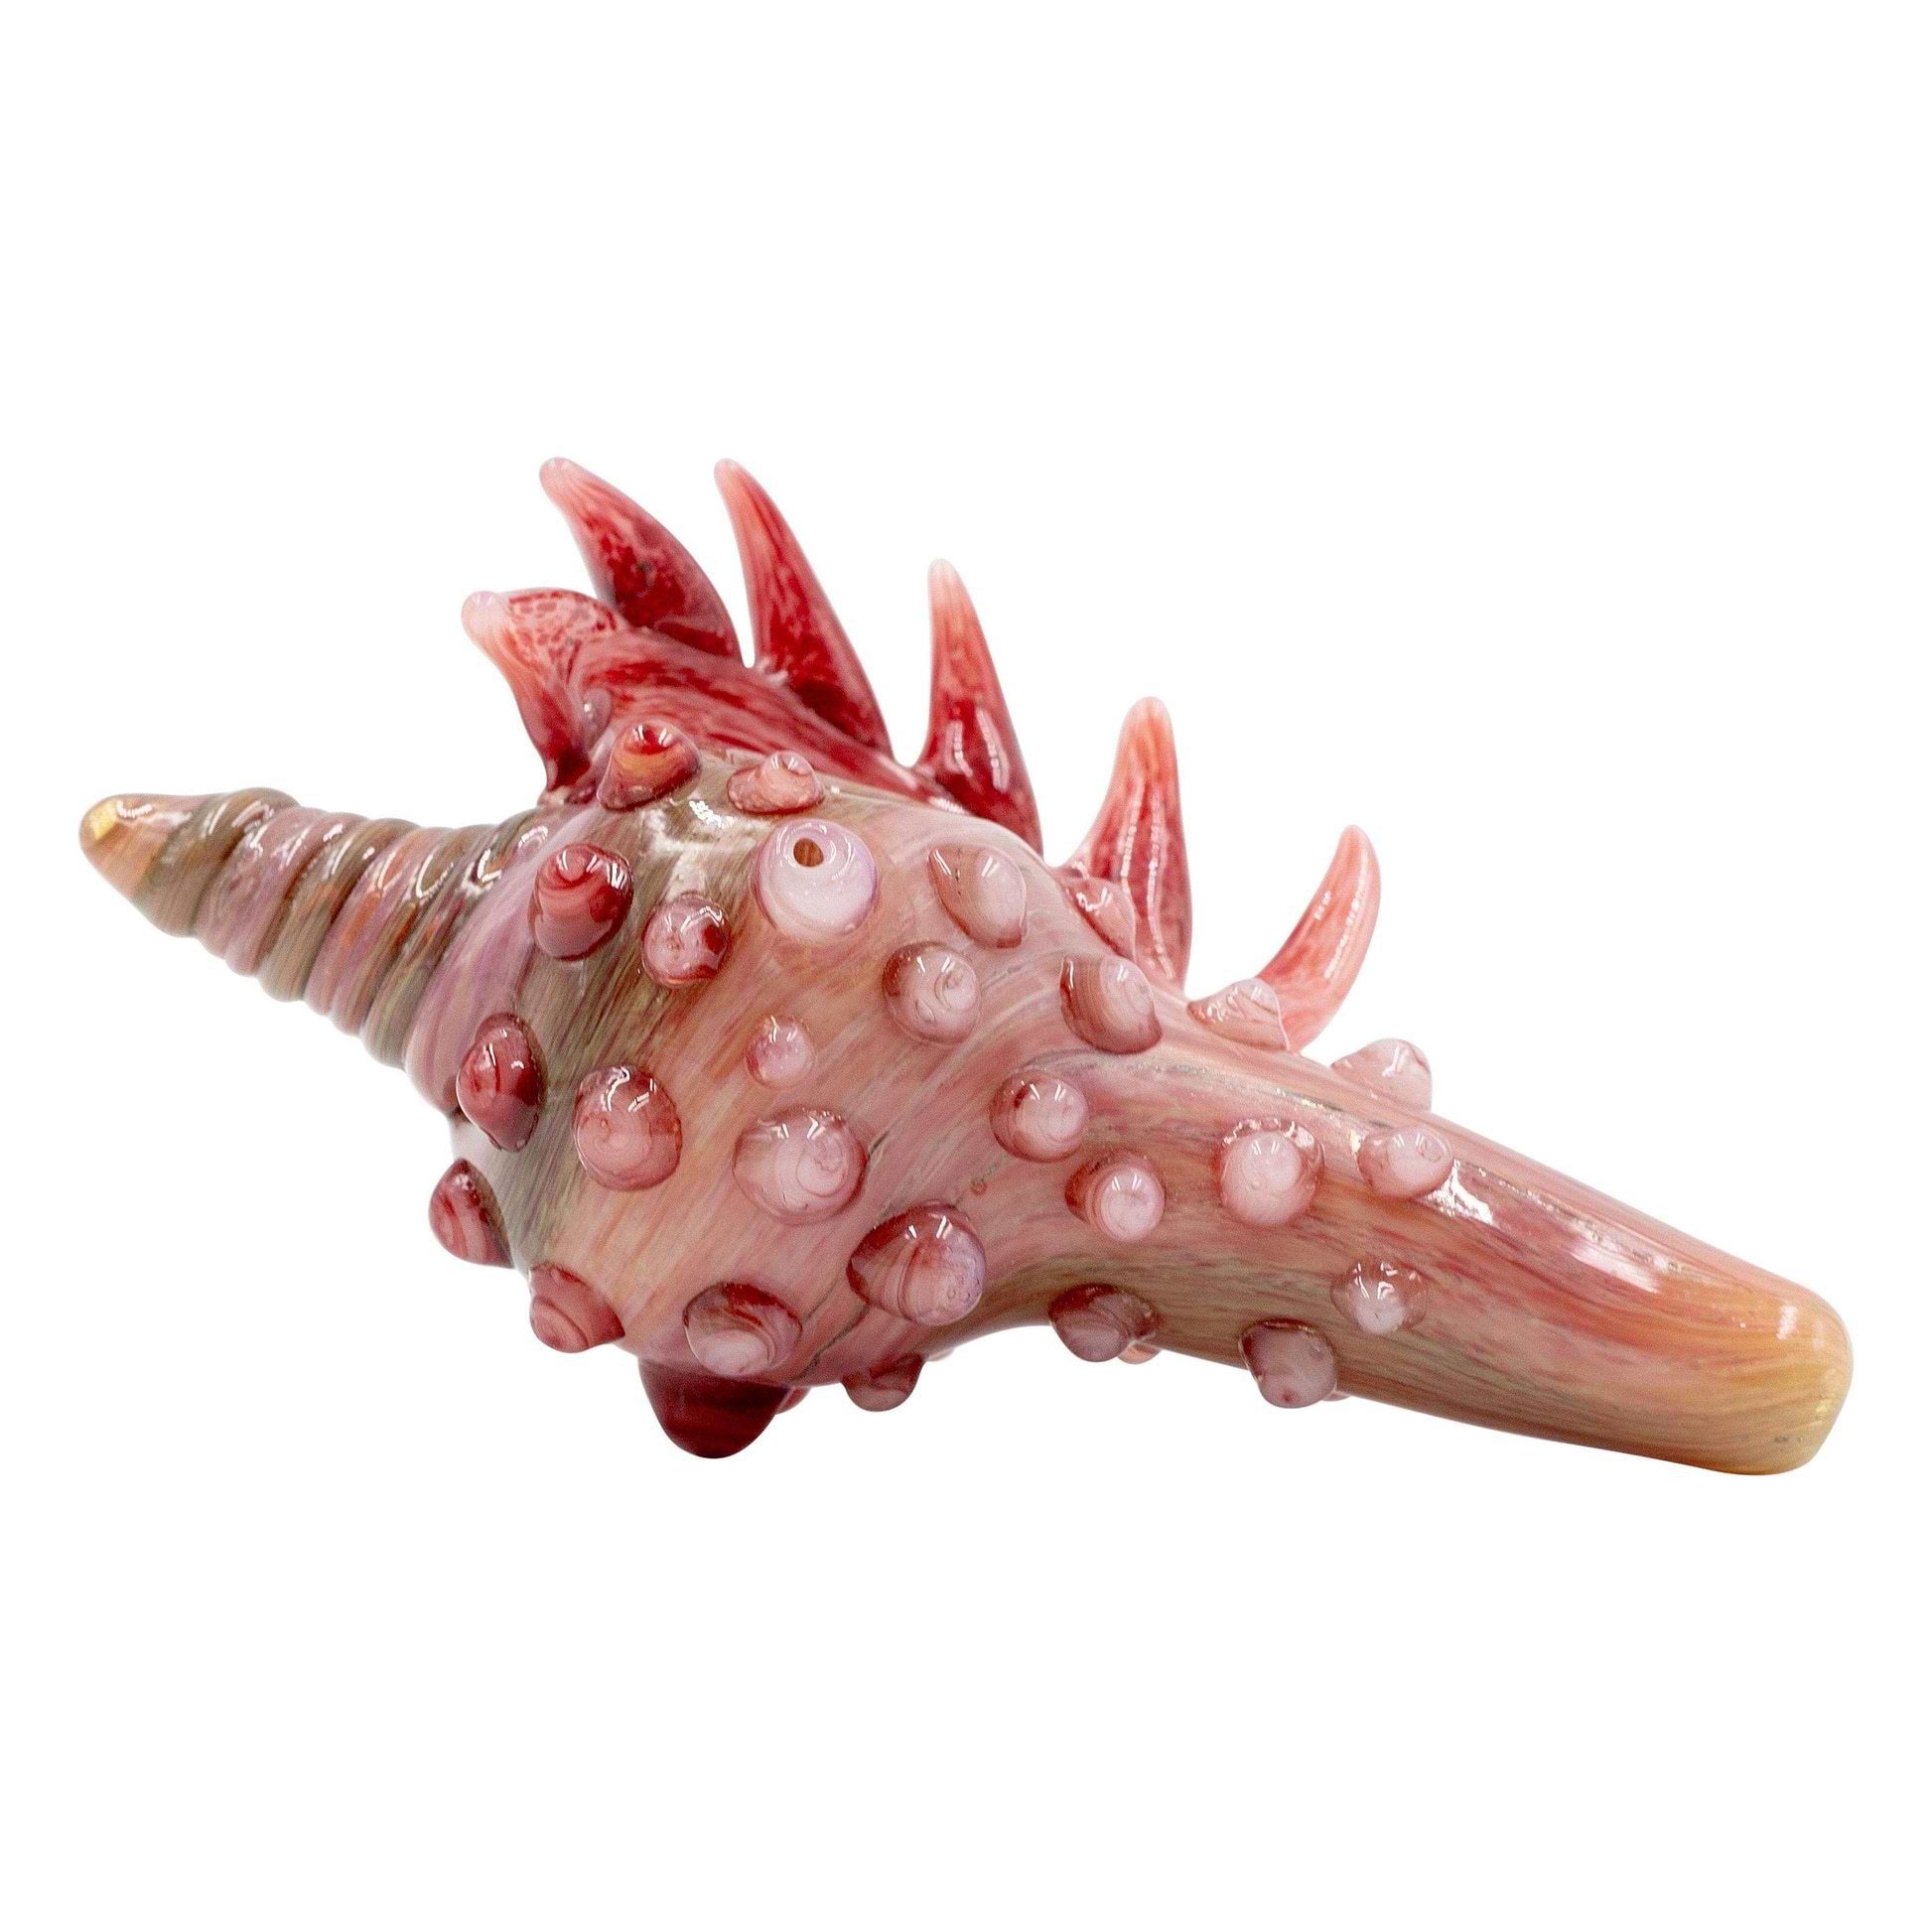 6-inch intricately-designed glass pipe smoking device seashell with dragon spikes design